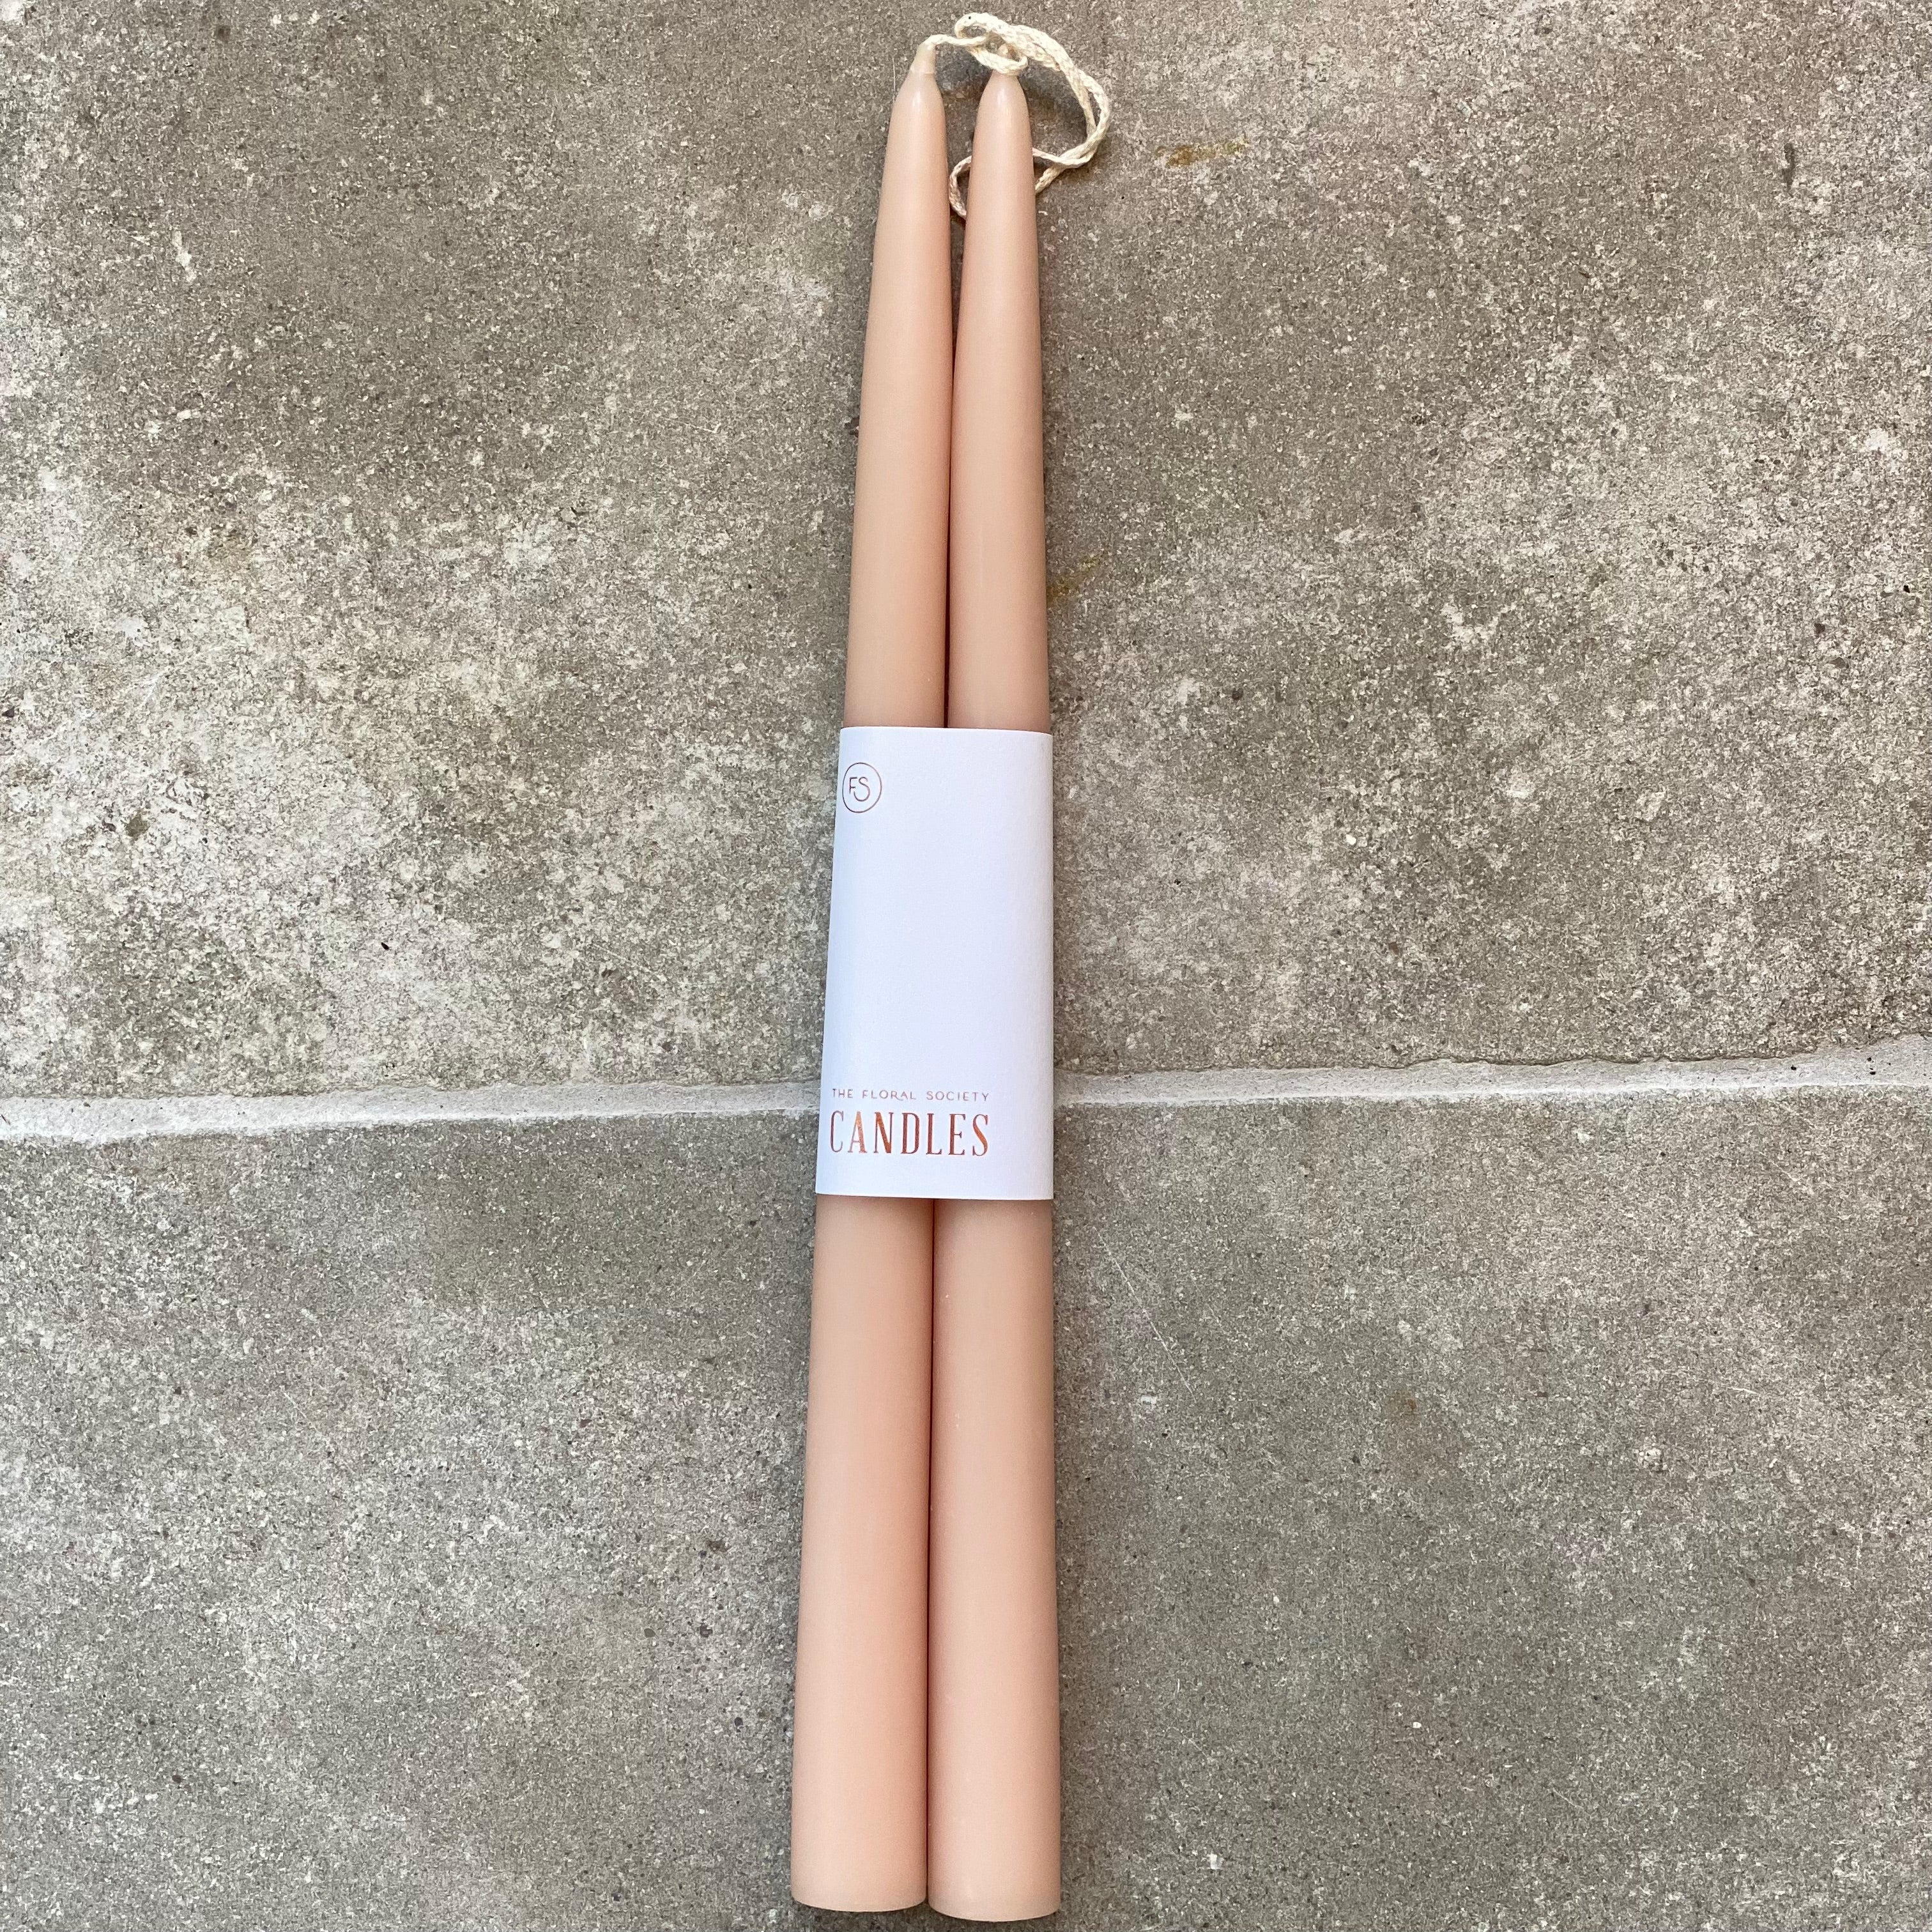 12" Pair of Taper Candles